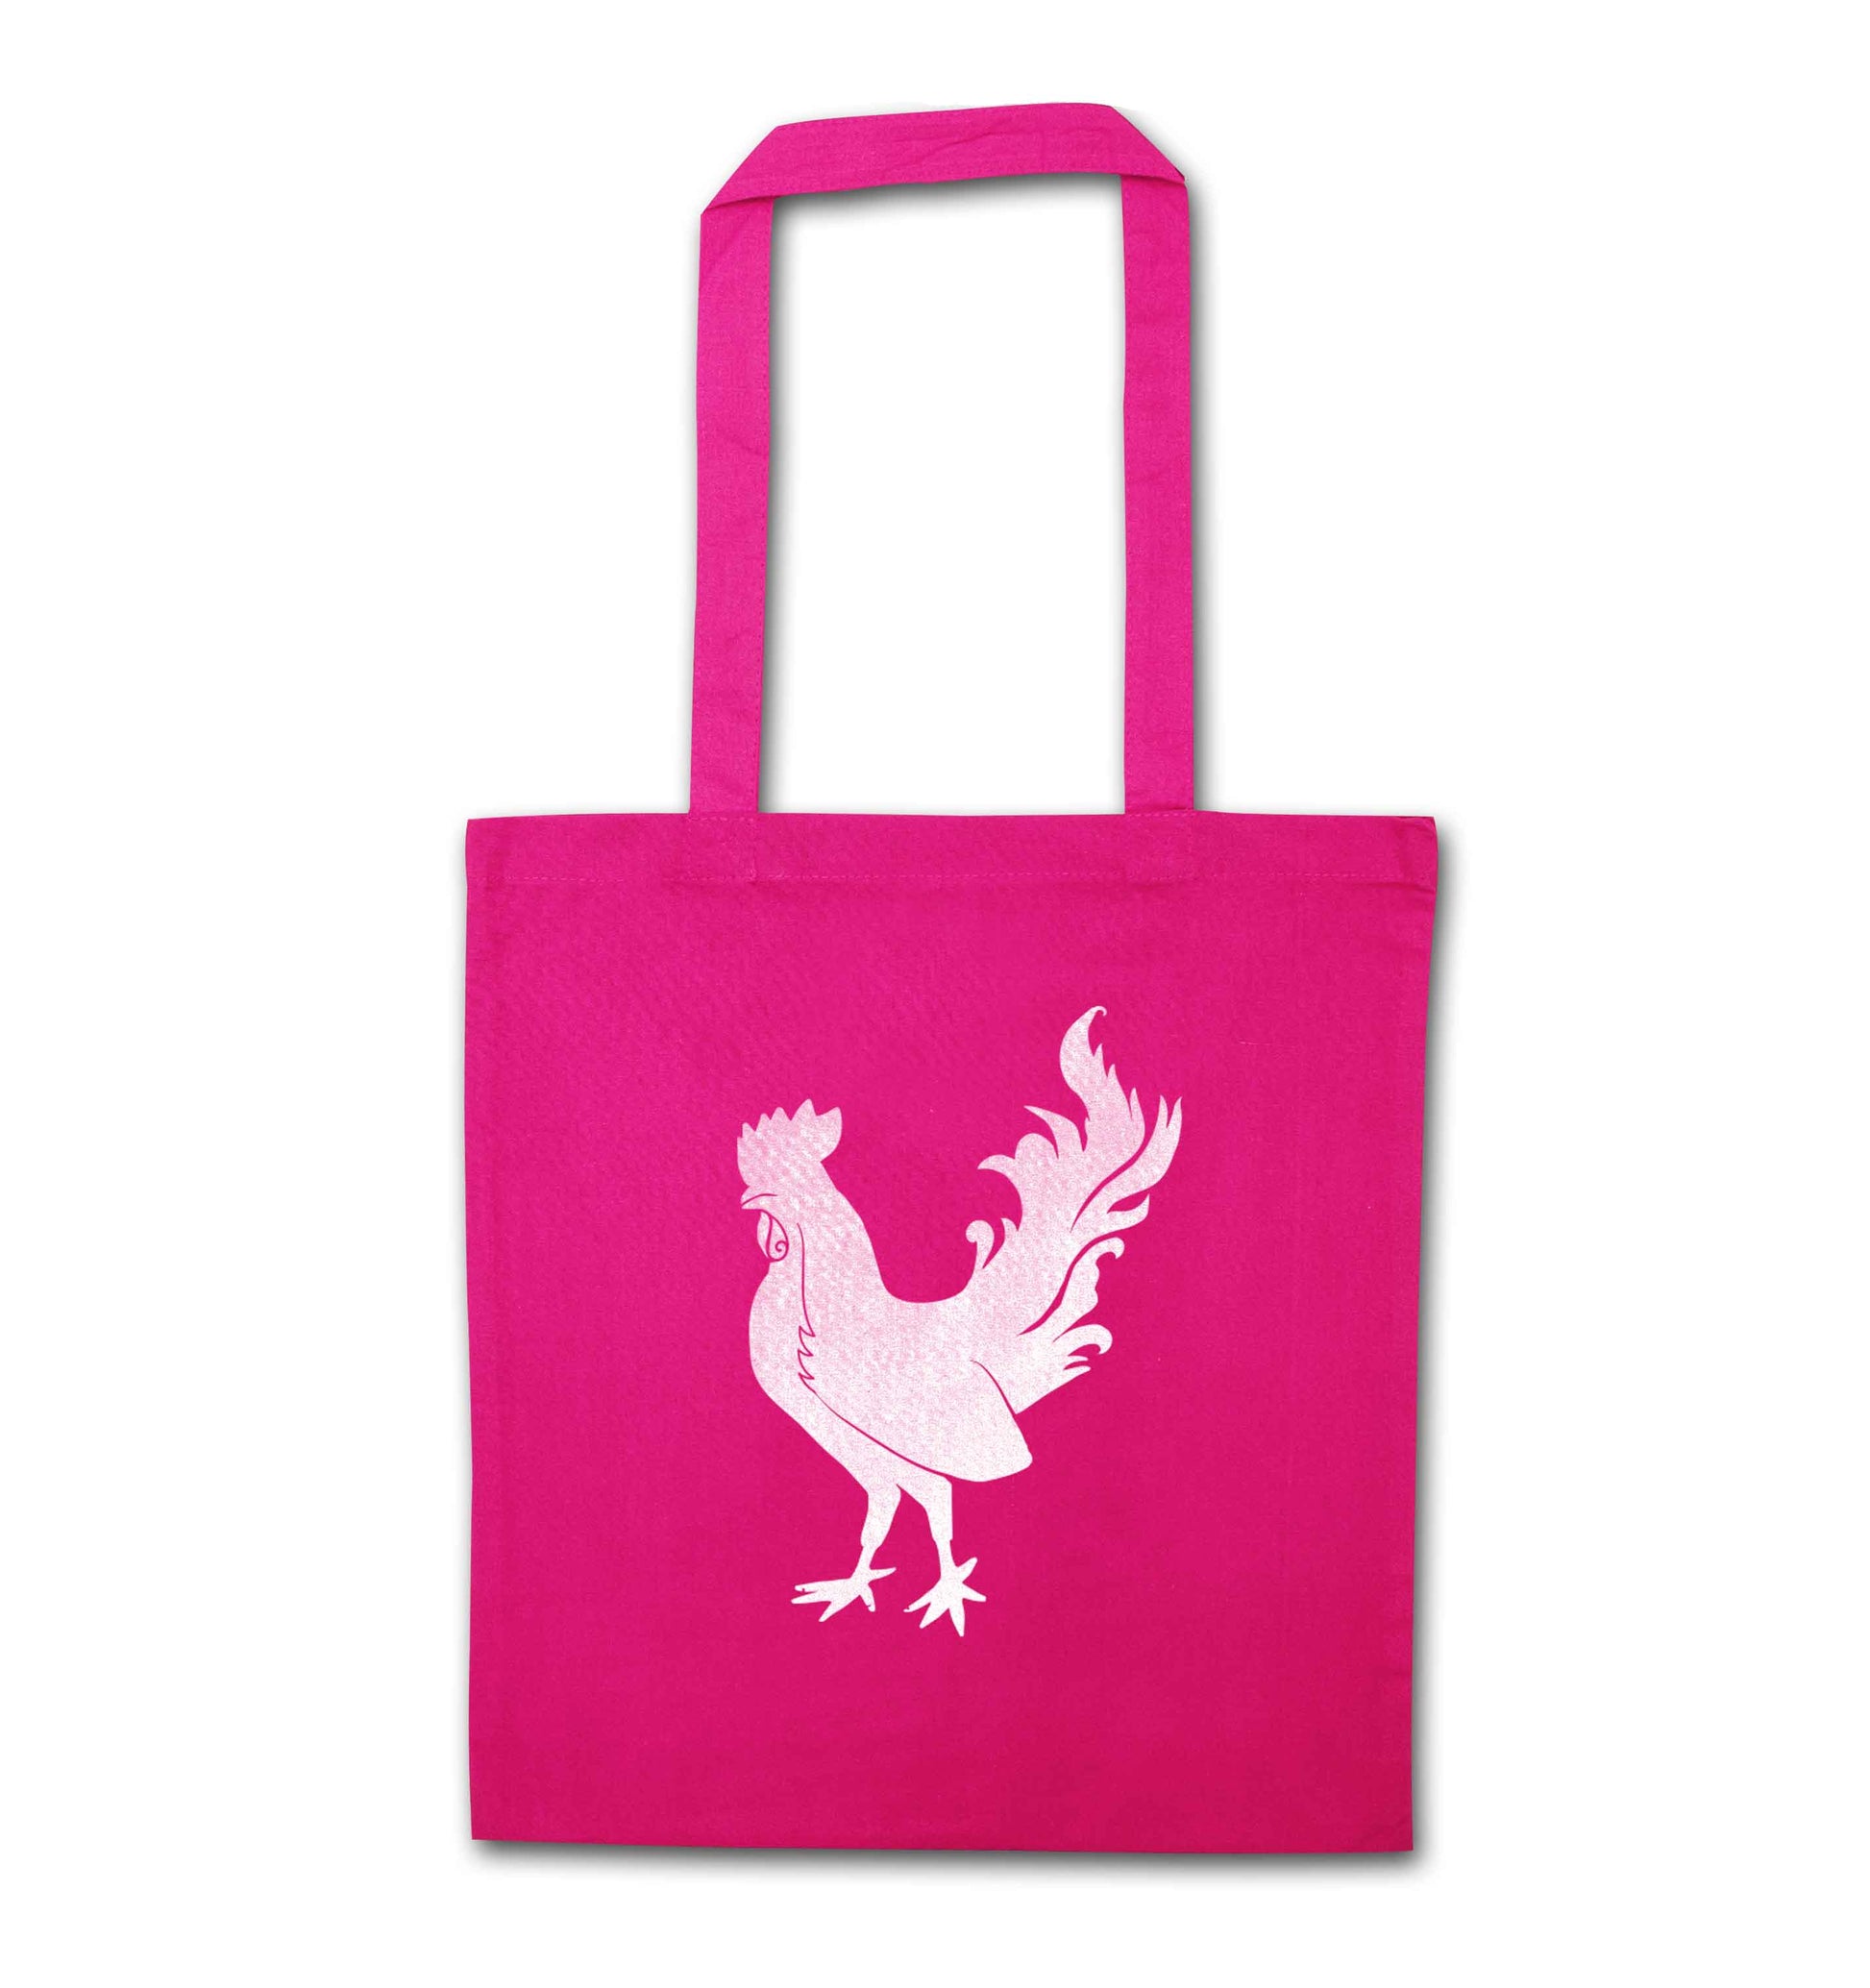 Rooster pink tote bag